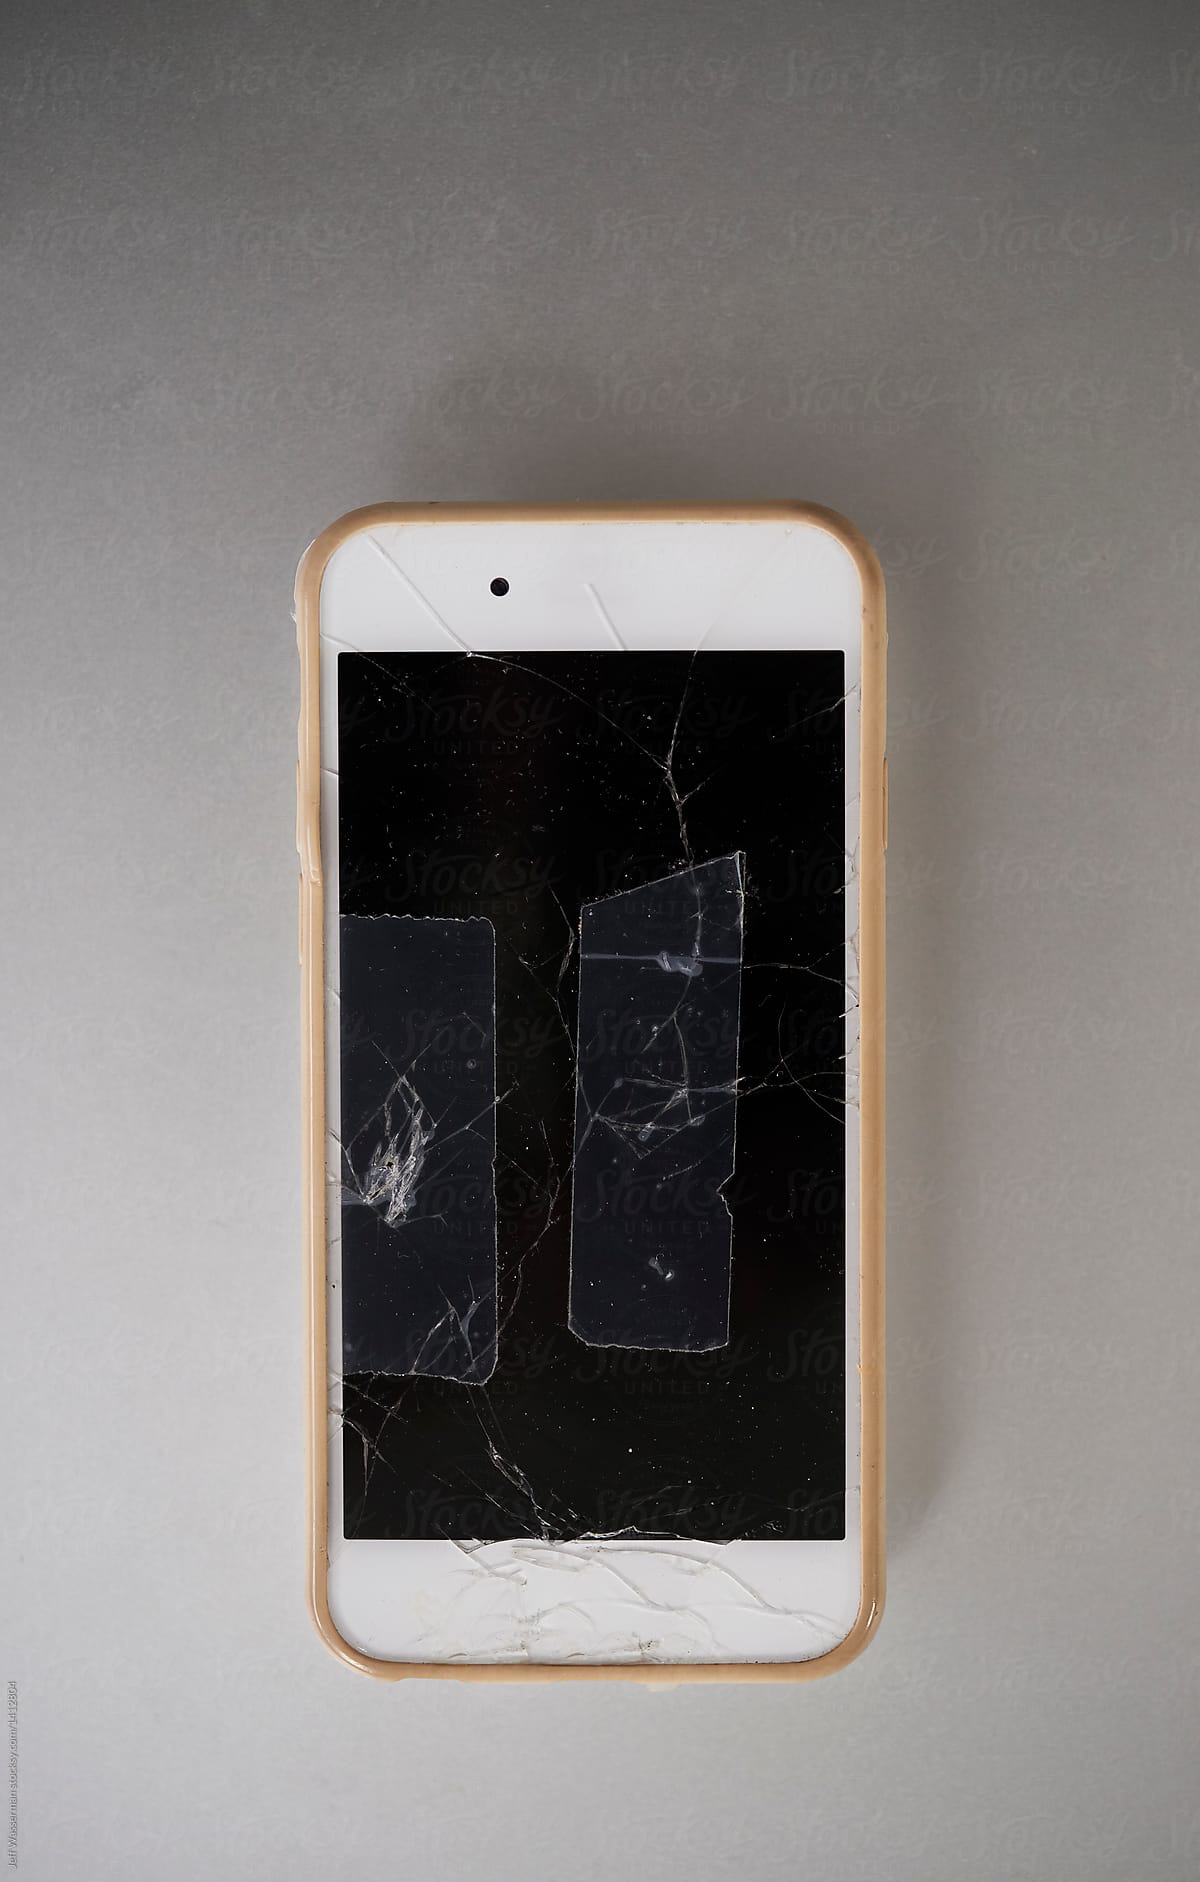 Cellphone with Glass Smashed